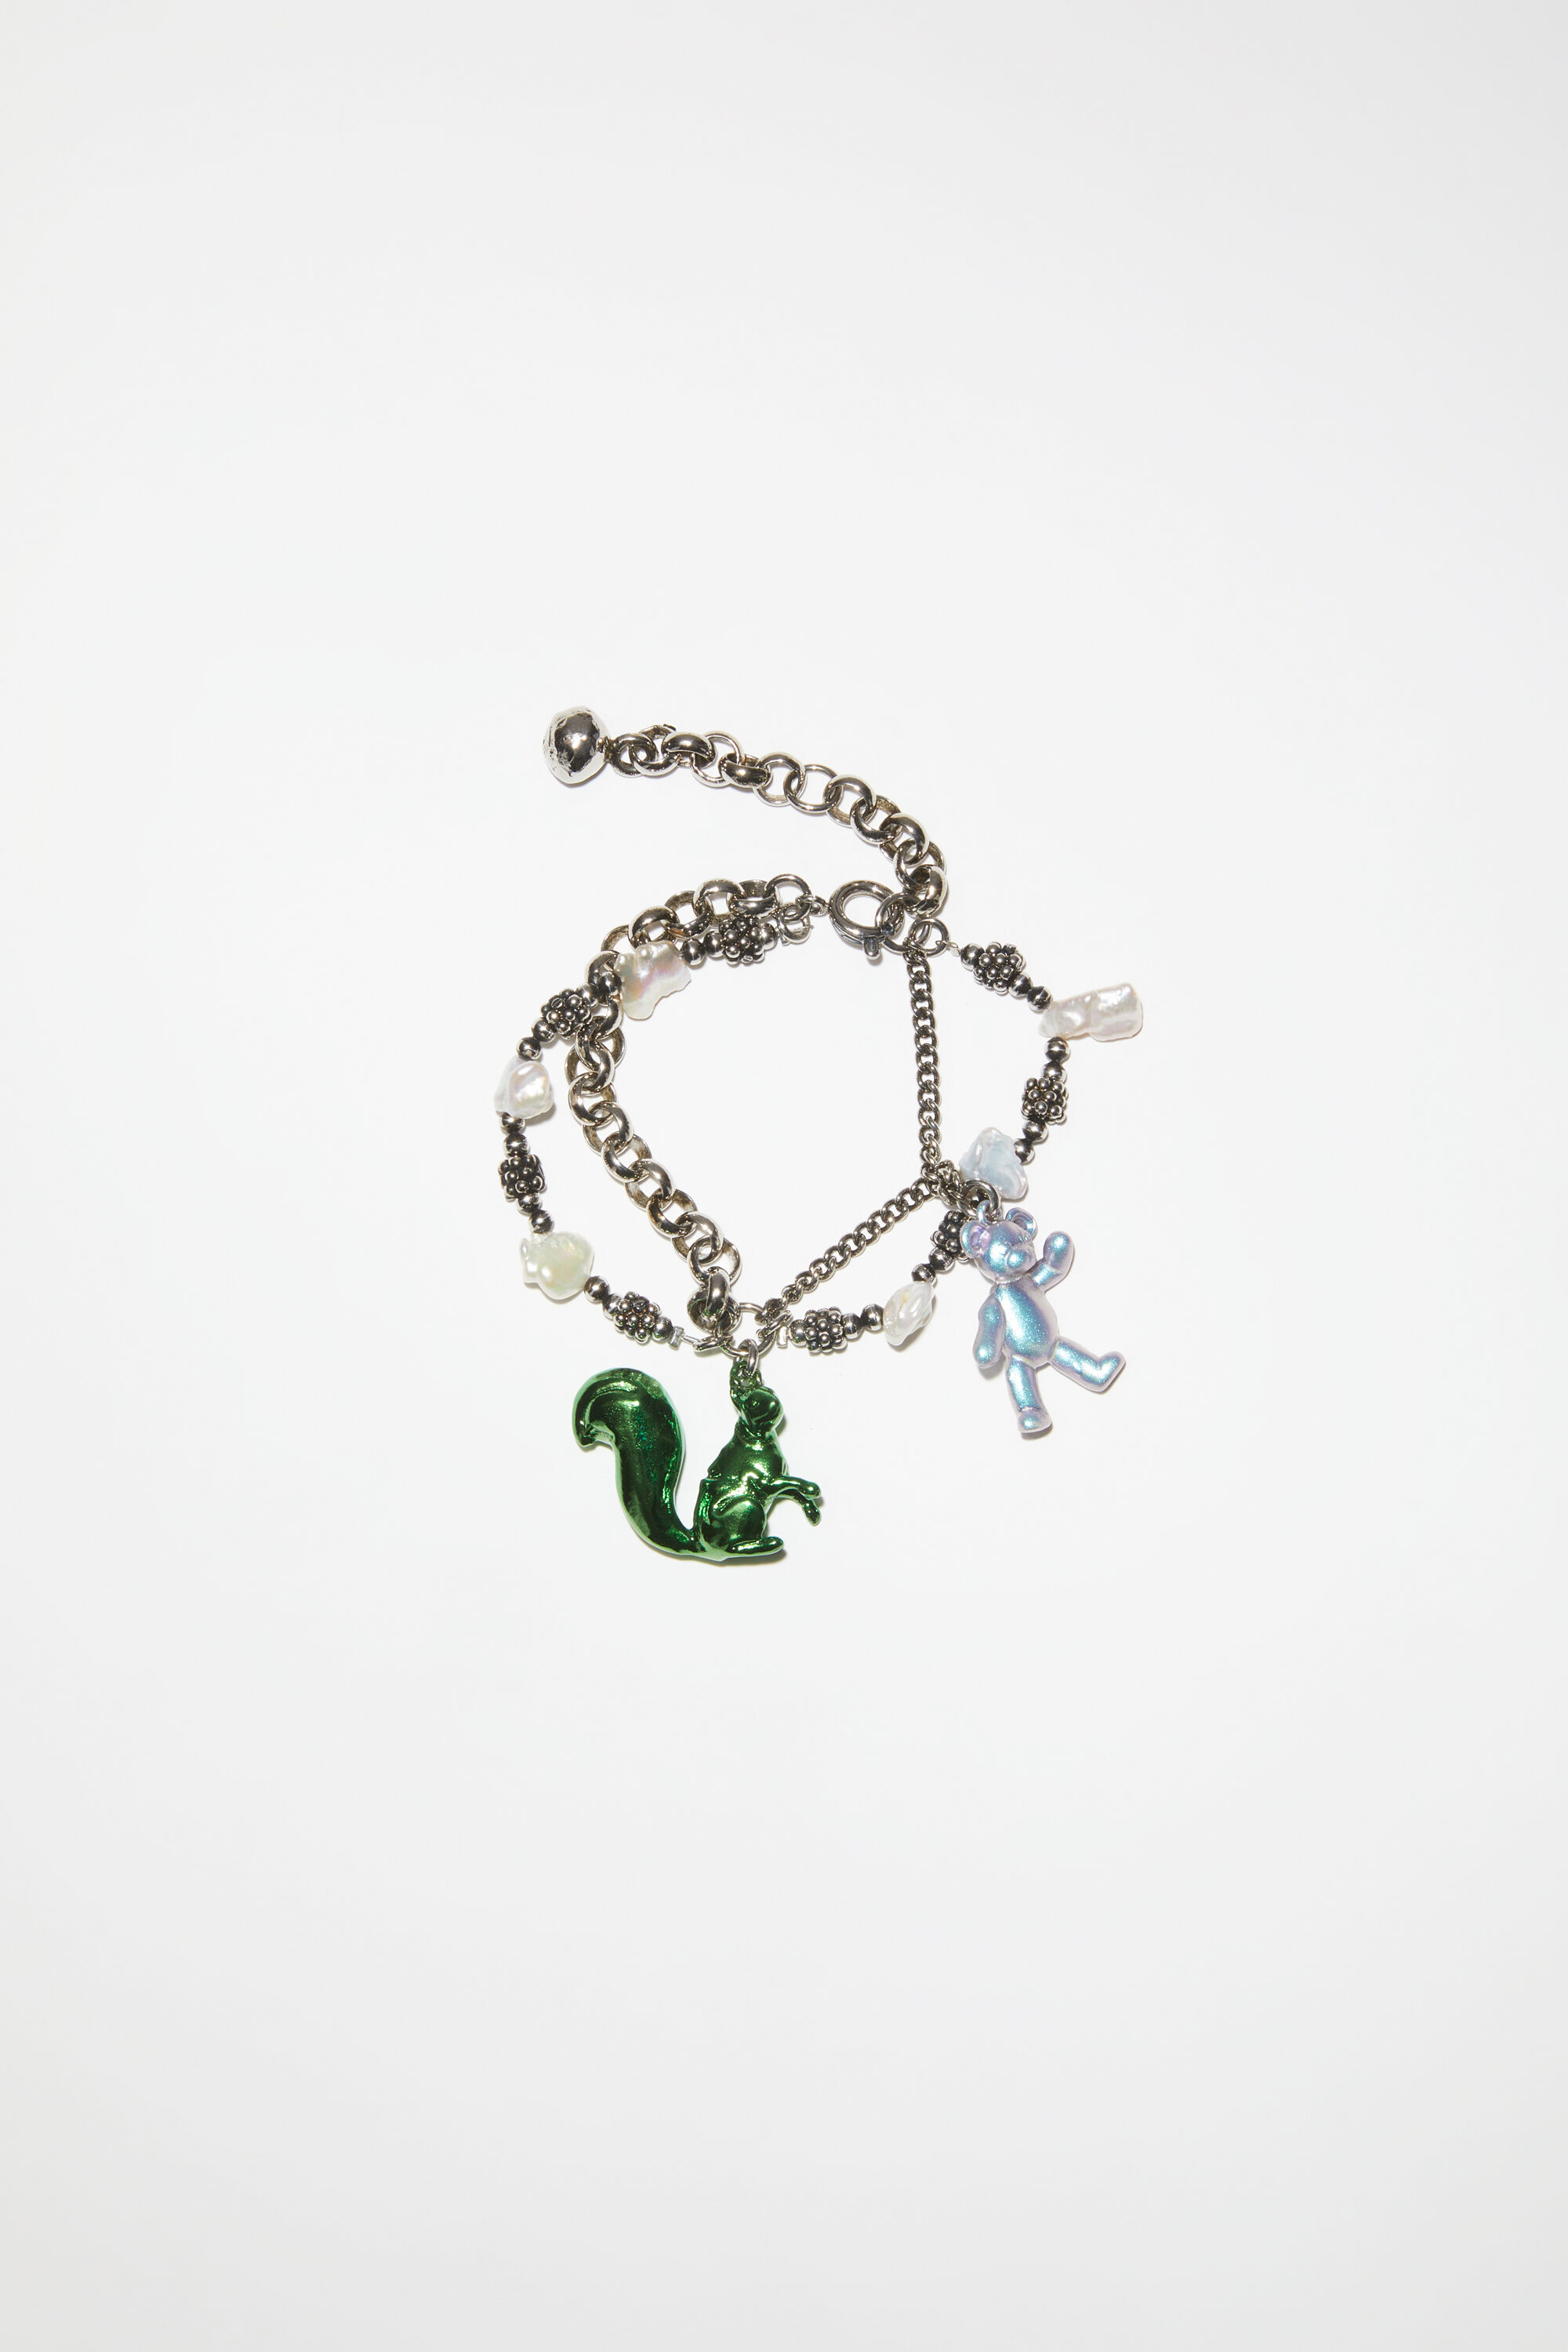 Marble Stone Bracelet With Science Charms from Team Genius Squad Store